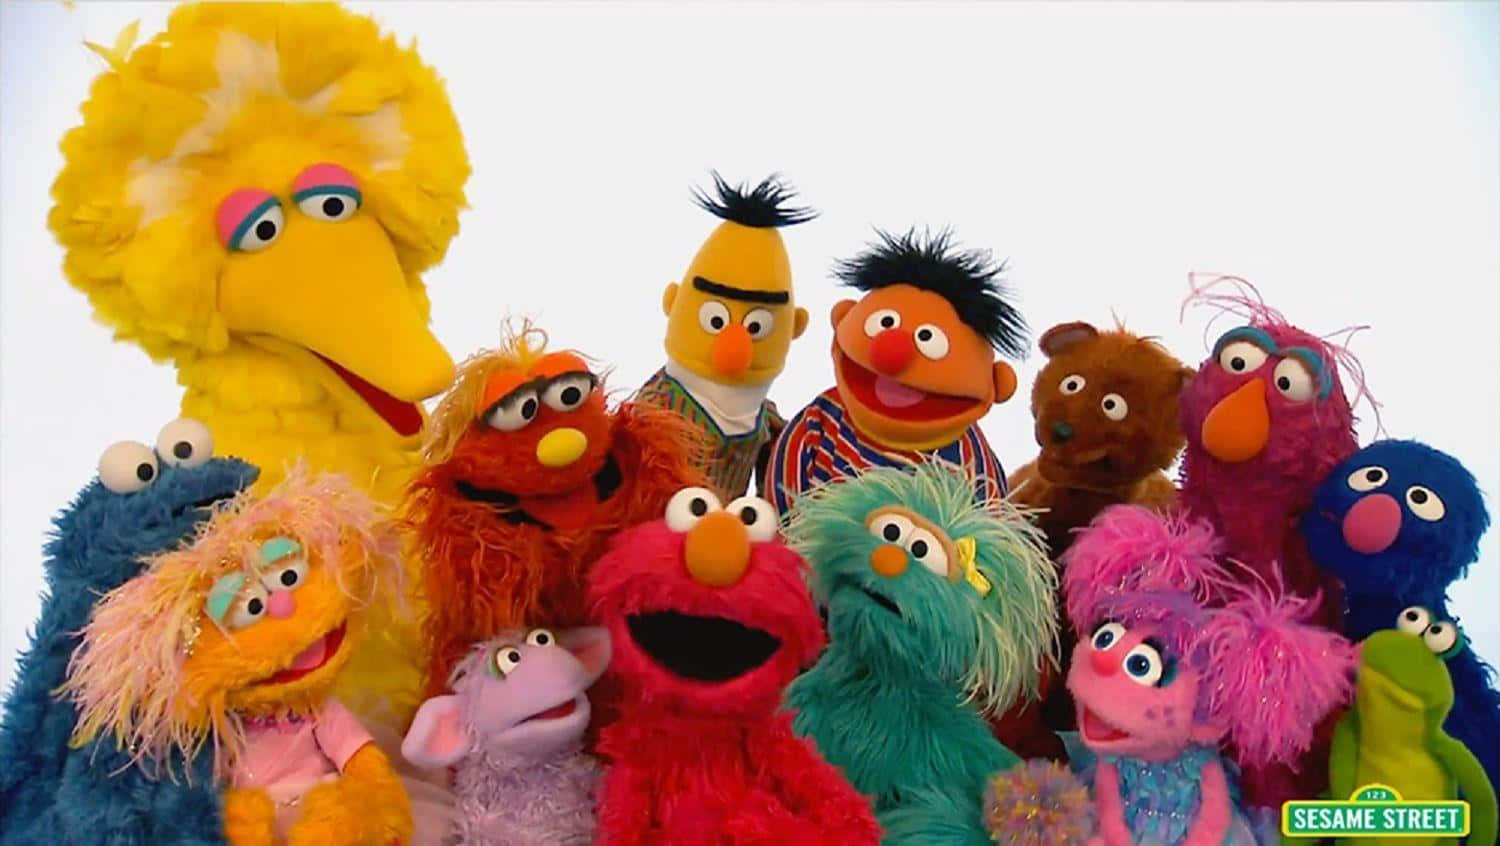 A vibrant view of Sesame Street